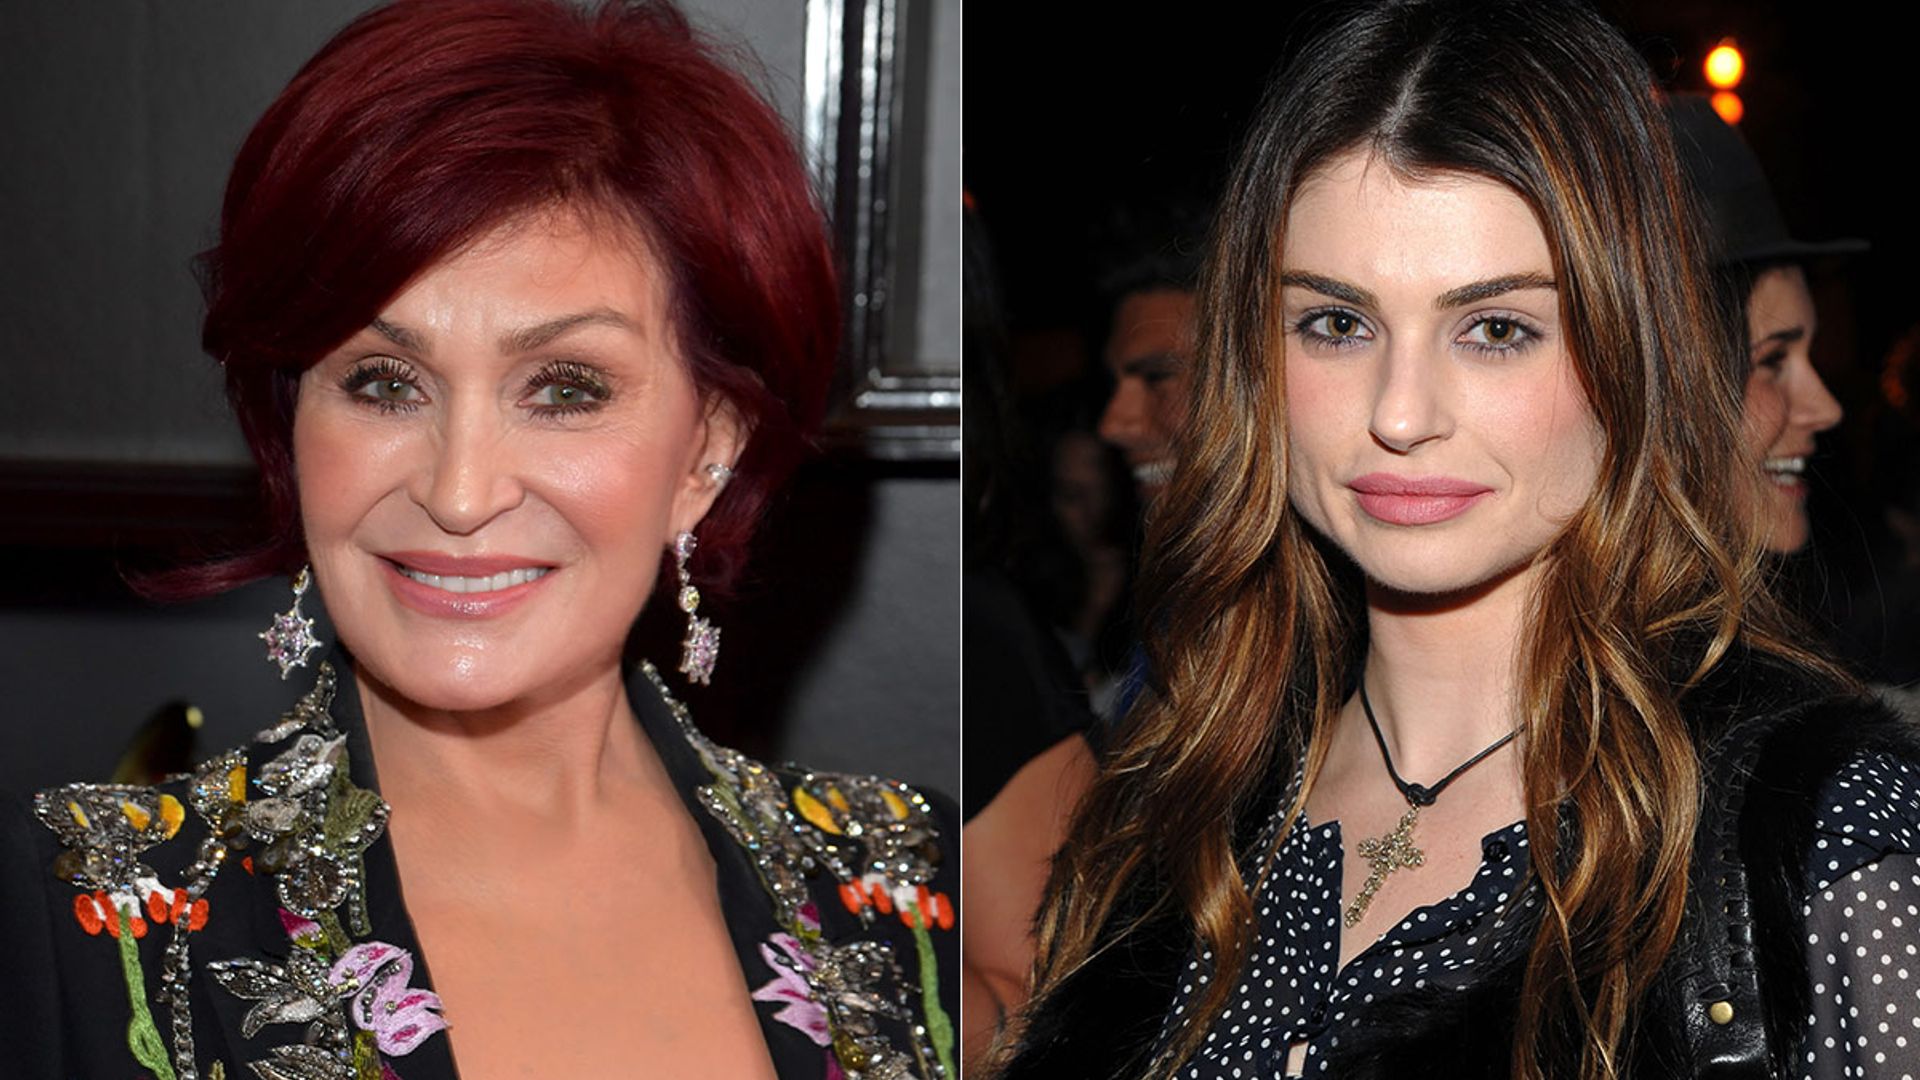 Sharon Osbourne's rarely-seen daughter Aimee pictured with famous family